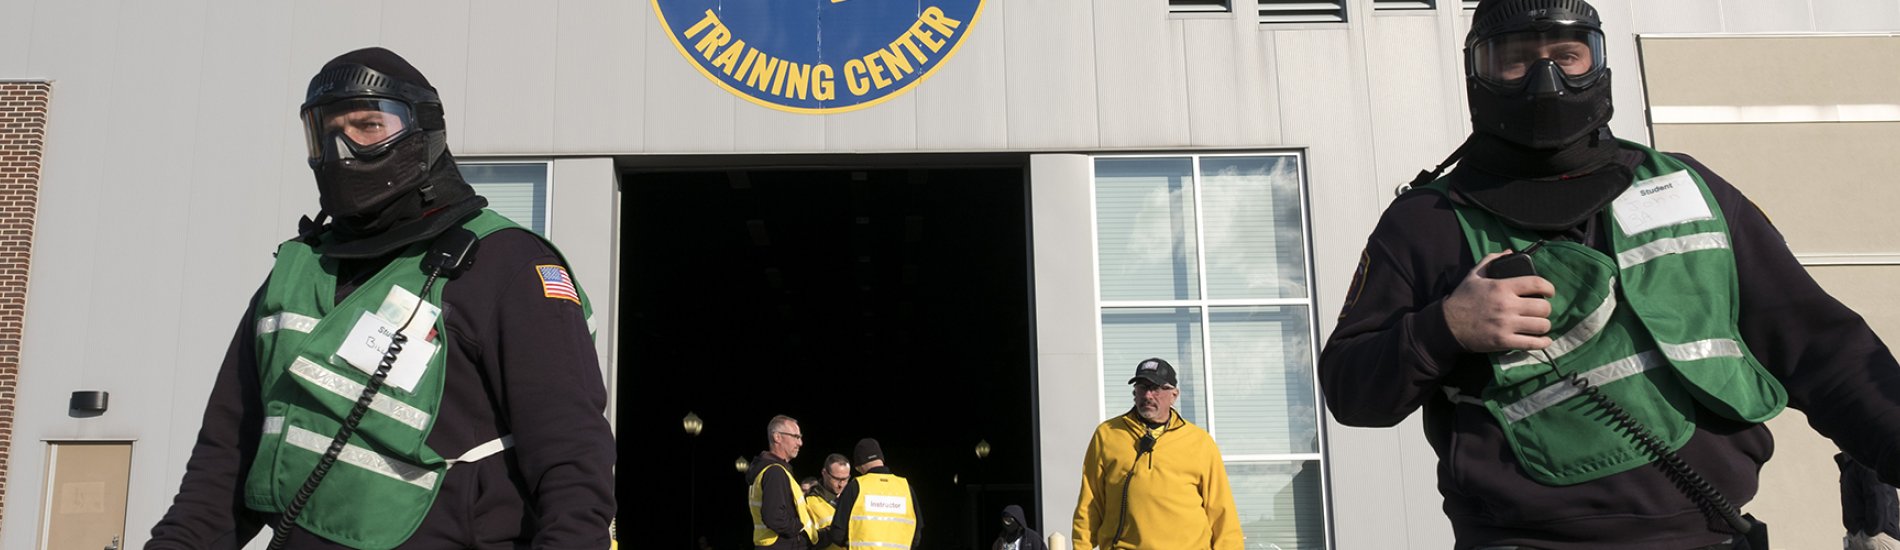 Active shooter training at UAlbany’s National Center for Security and Preparedness.